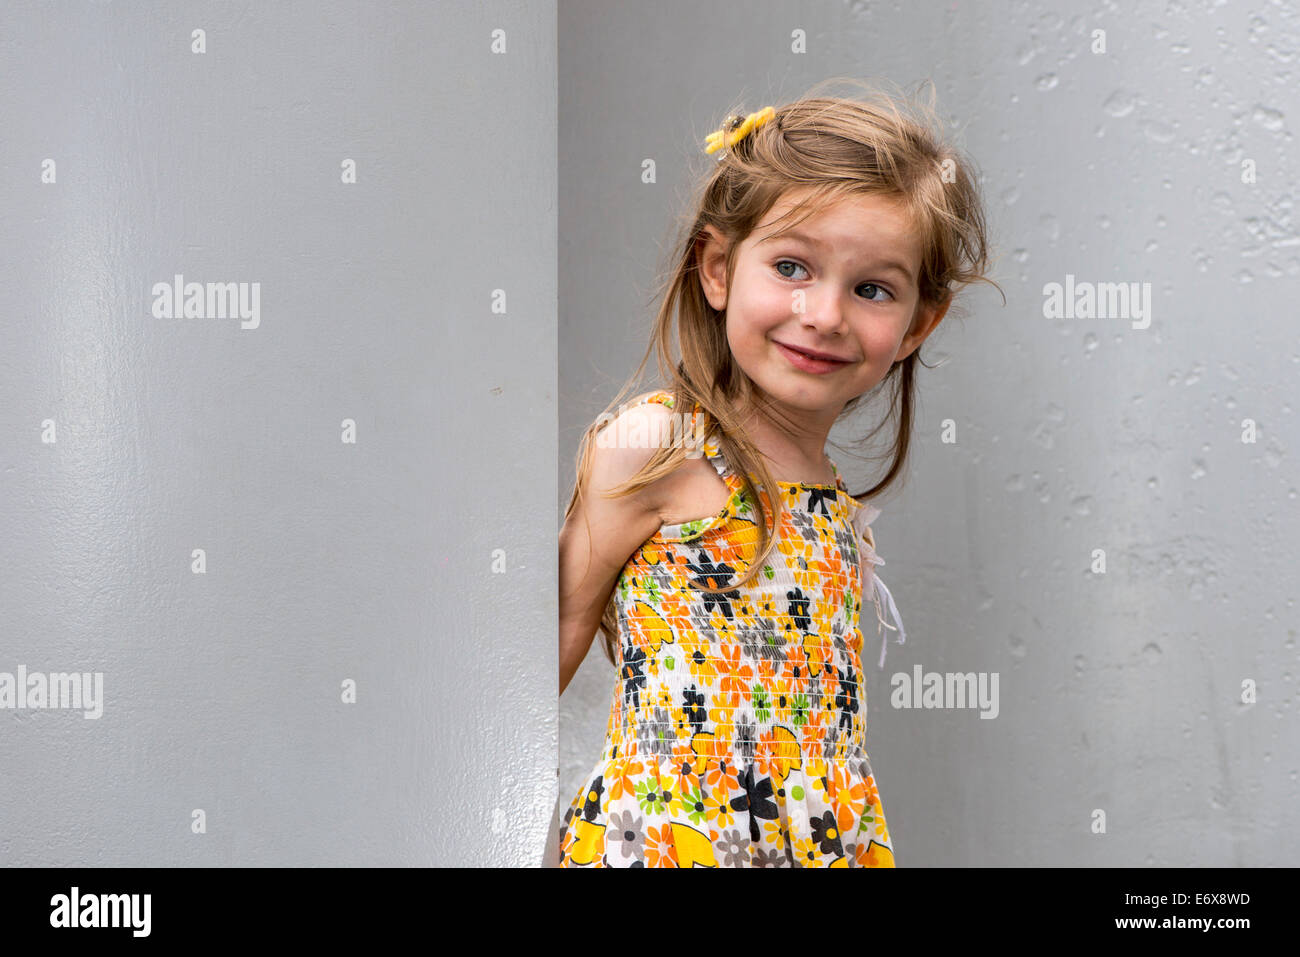 A smiling girl, 3 years, wearing a dress, standing between walls, Germany Stock Photo